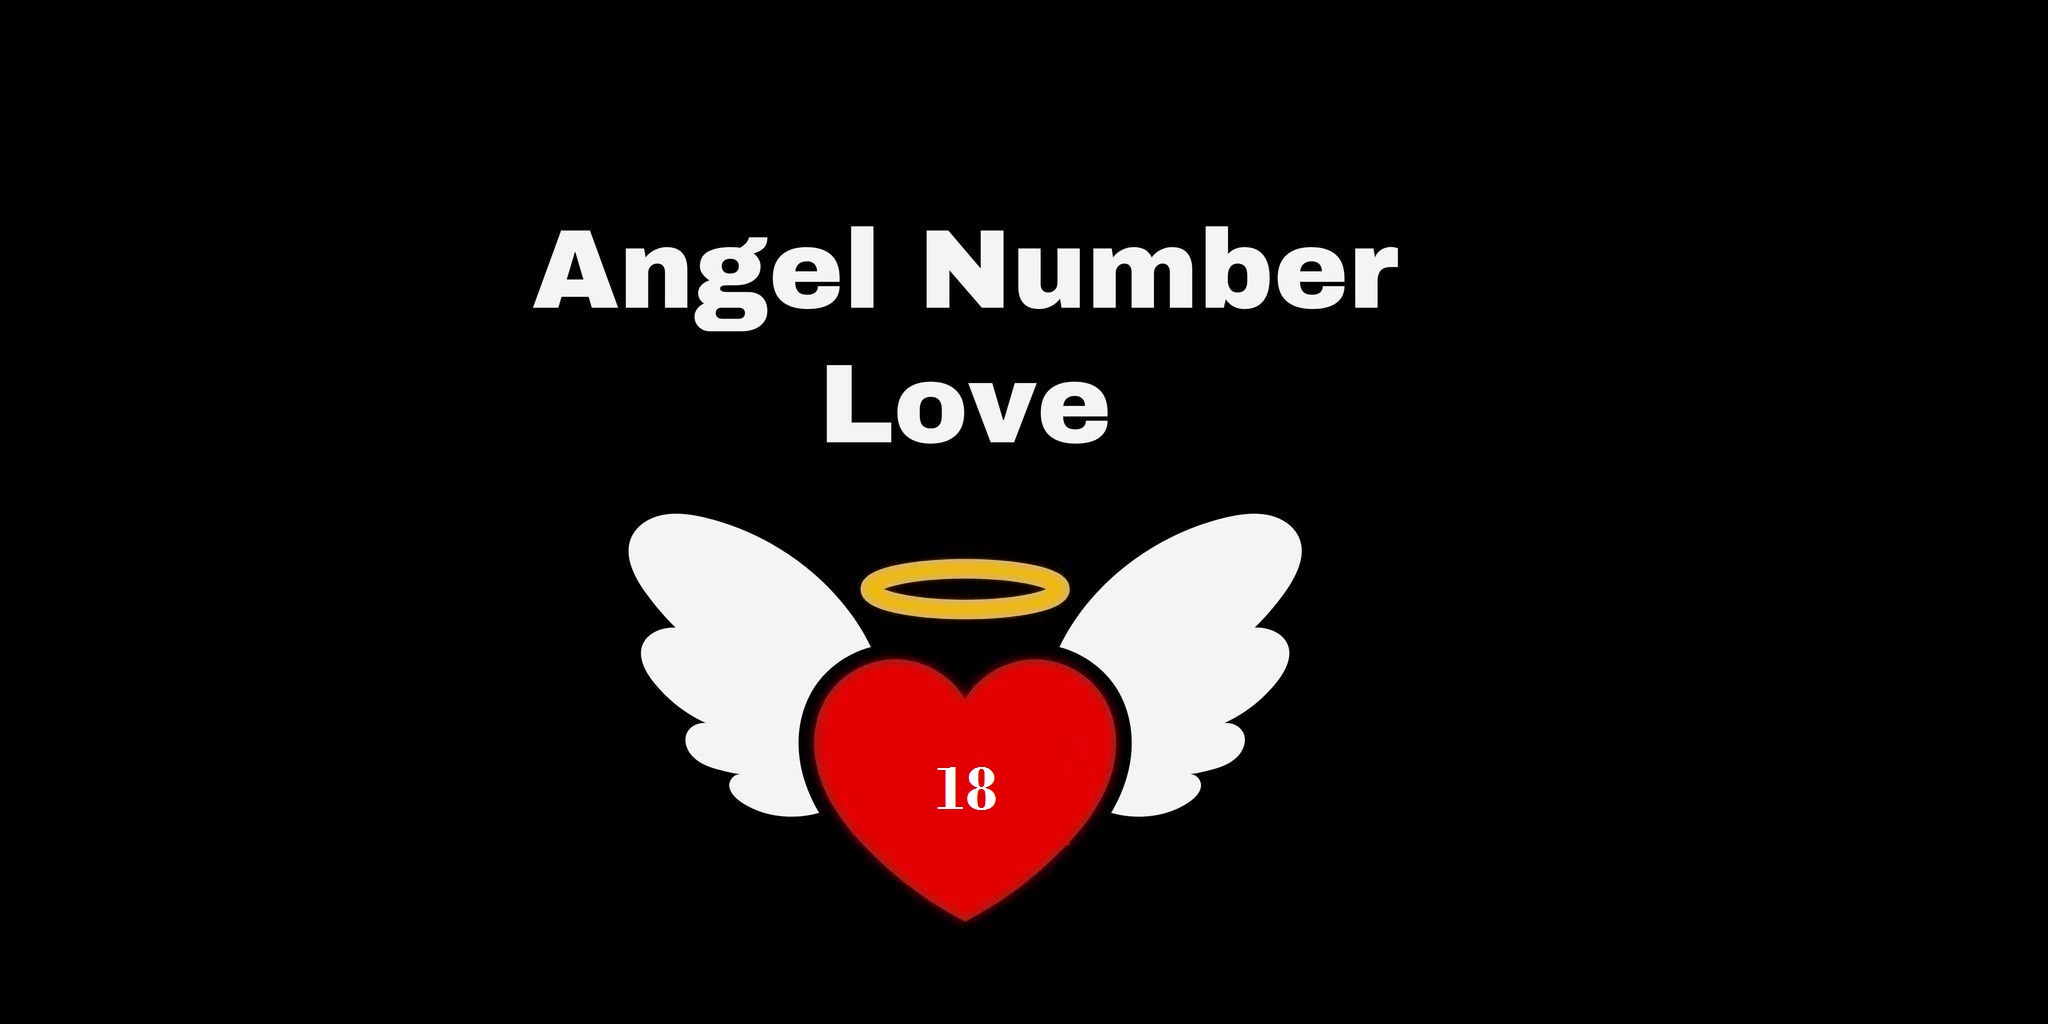 18 Angel Number Meaning In Love